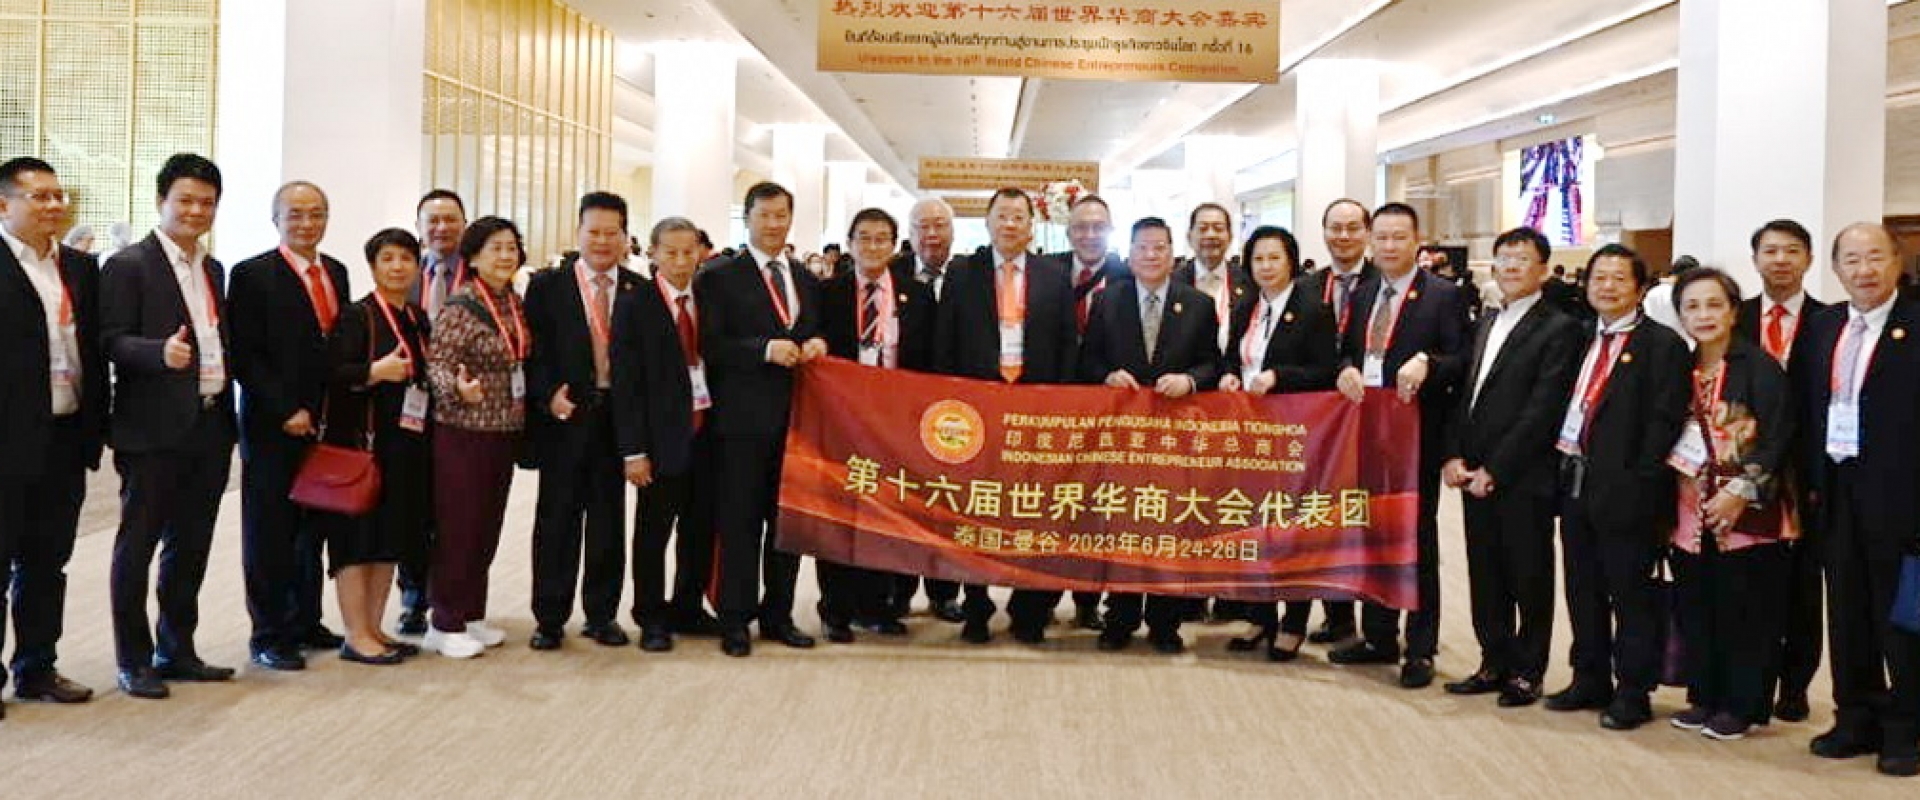 The 16th World Chinese Entrepreneurs Conference